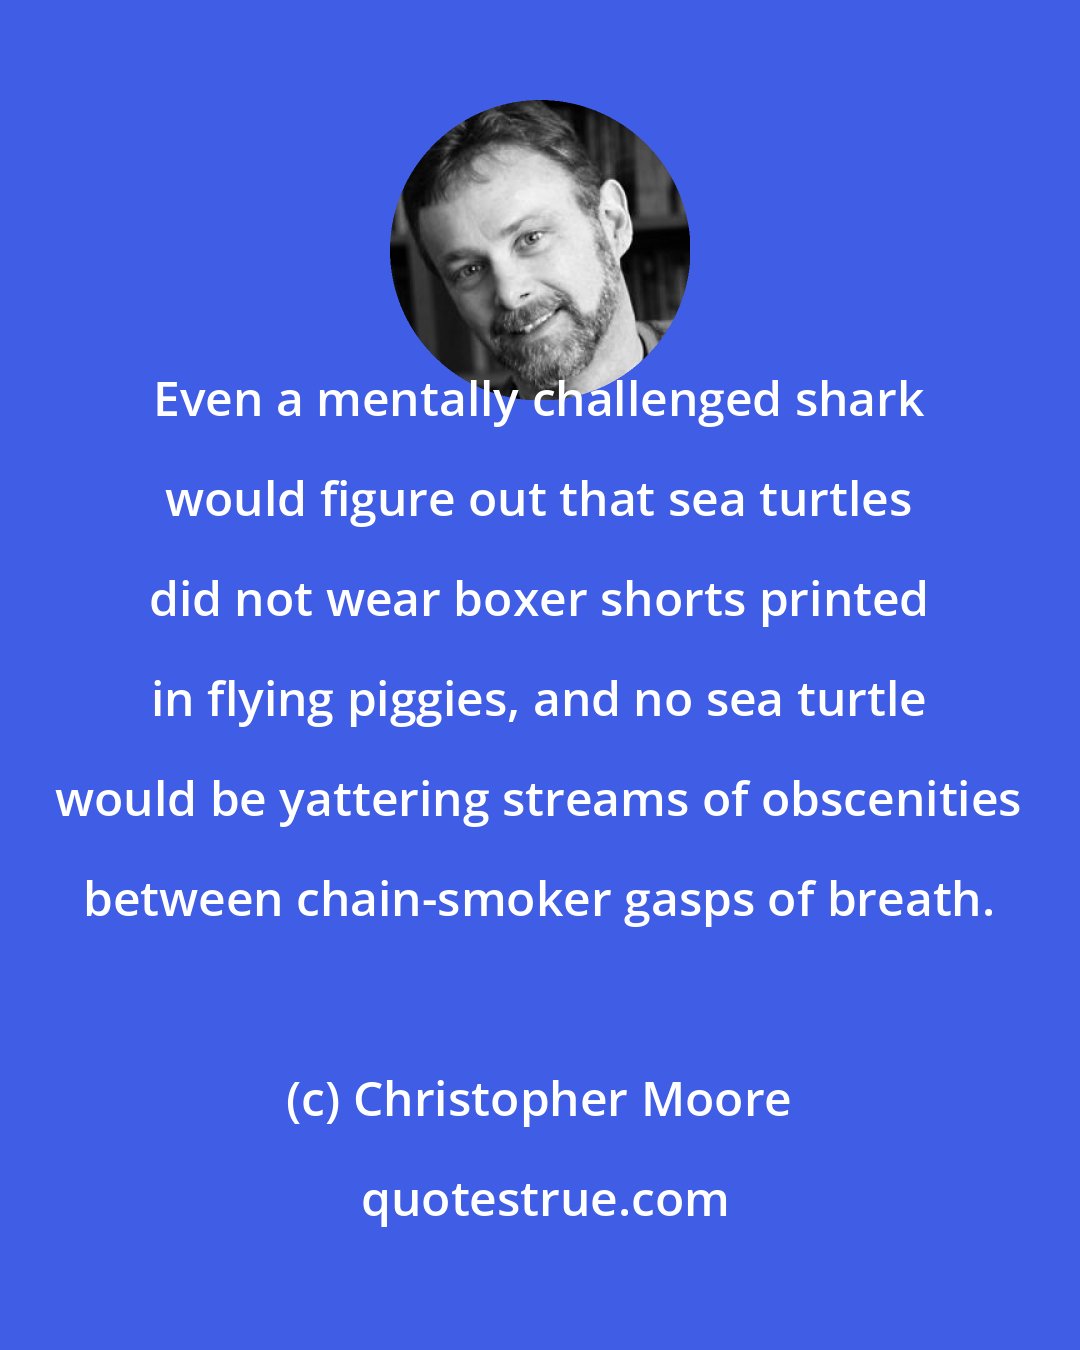 Christopher Moore: Even a mentally challenged shark would figure out that sea turtles did not wear boxer shorts printed in flying piggies, and no sea turtle would be yattering streams of obscenities between chain-smoker gasps of breath.